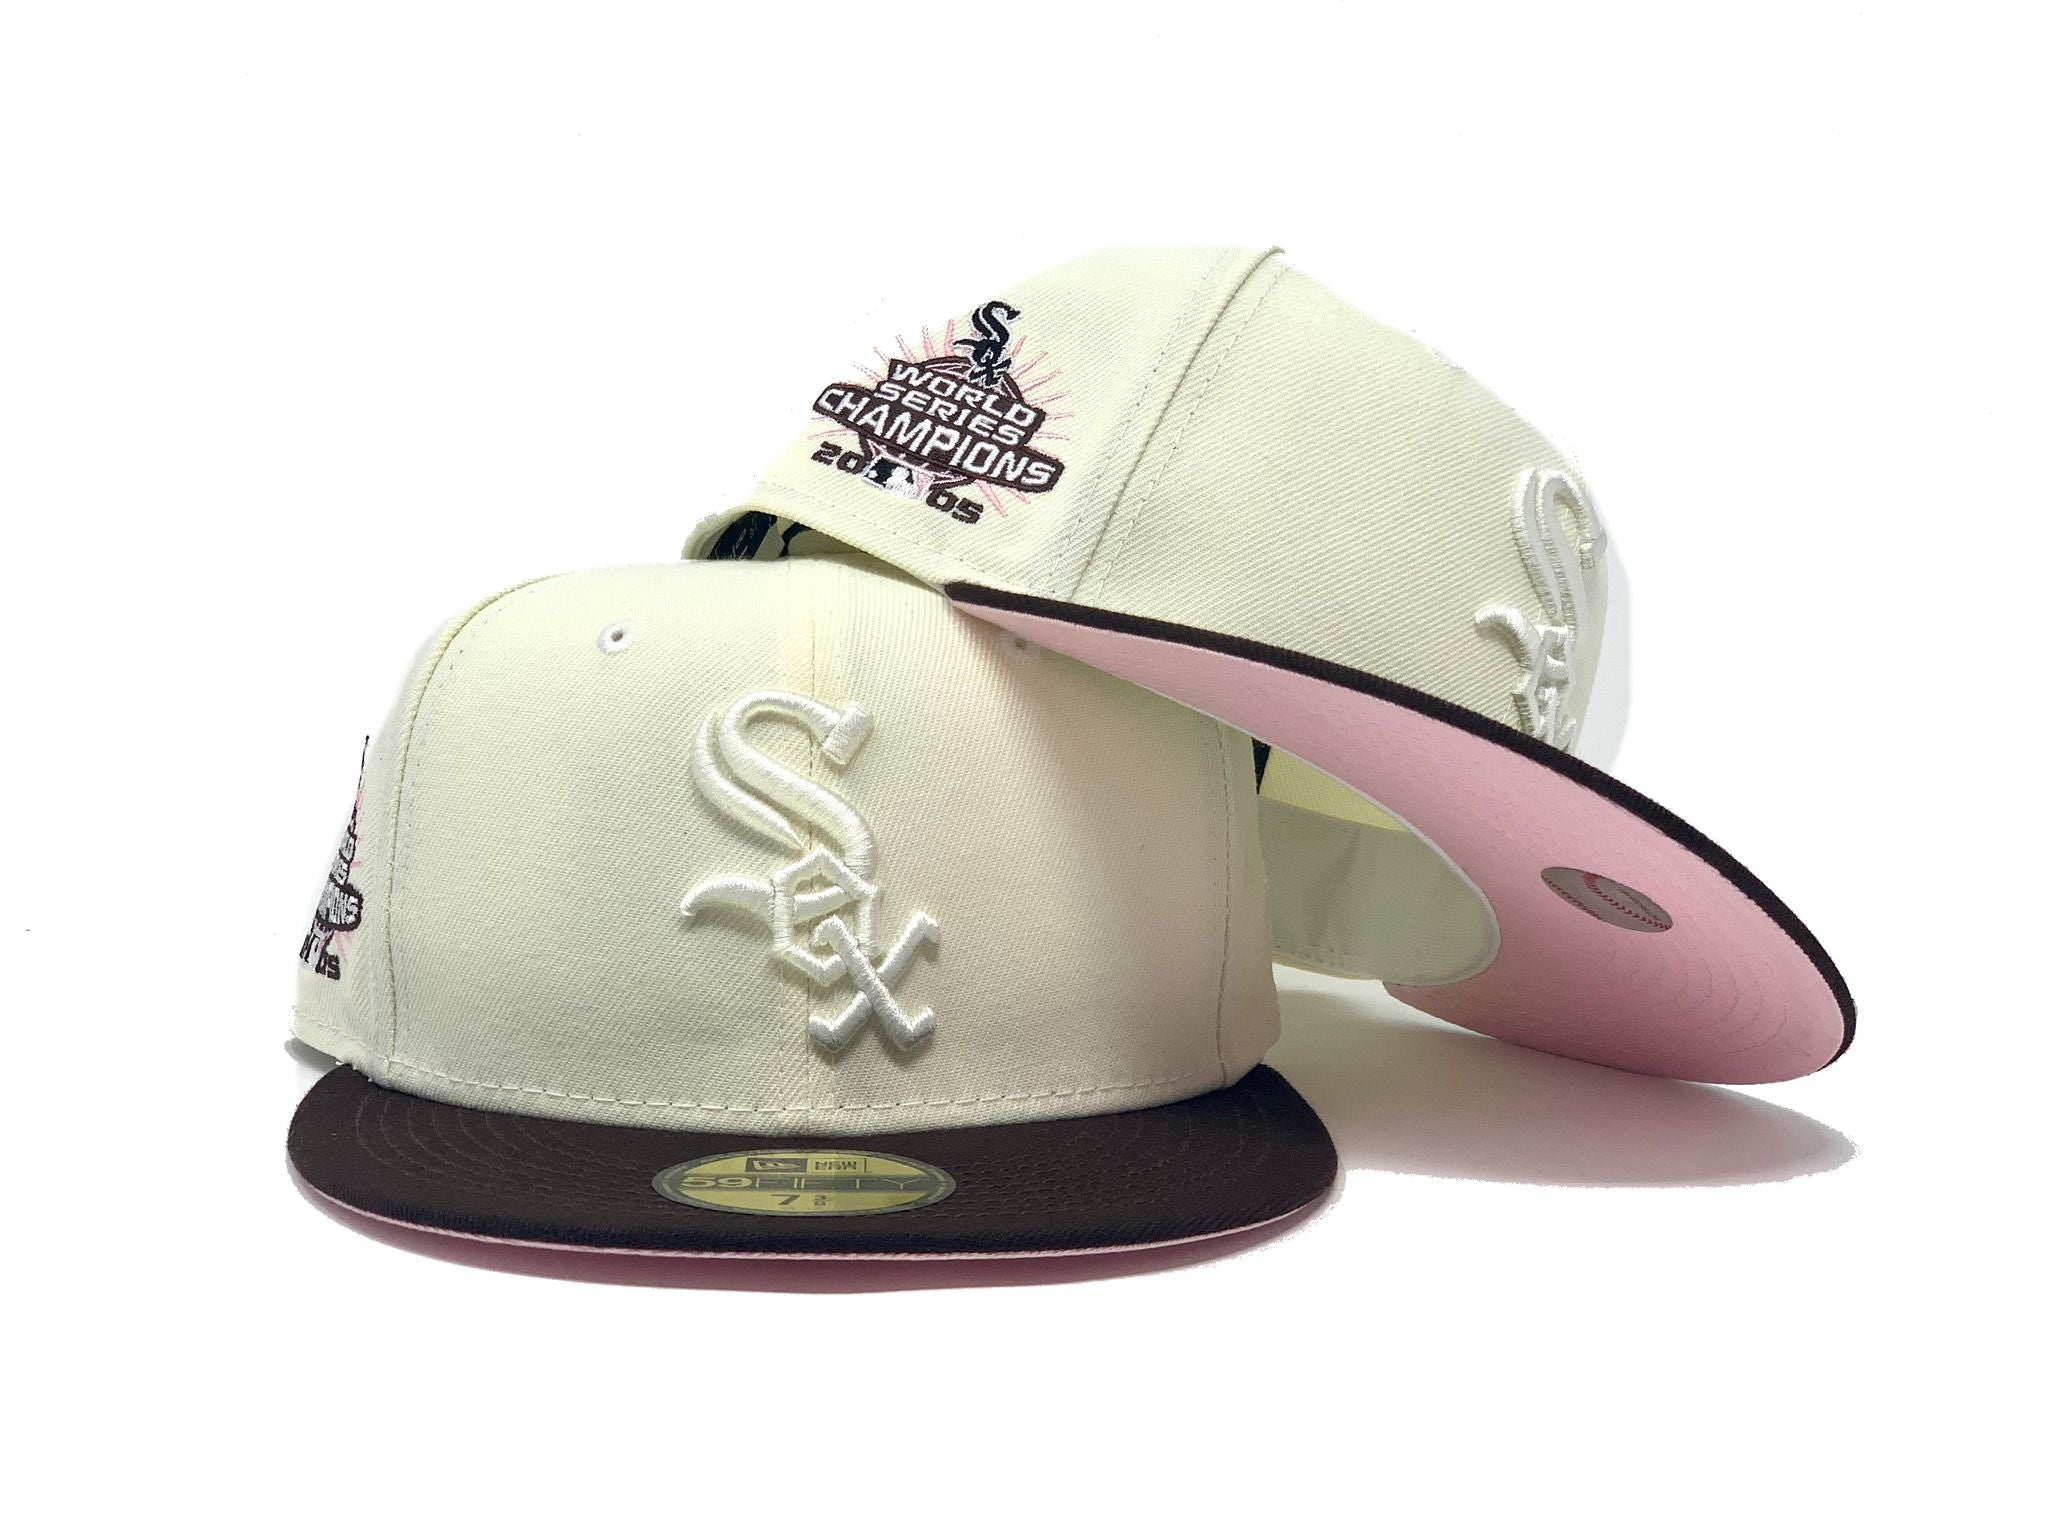 American Needle x MLB 1976 Chicago White Sox Fitted Baseball Caps